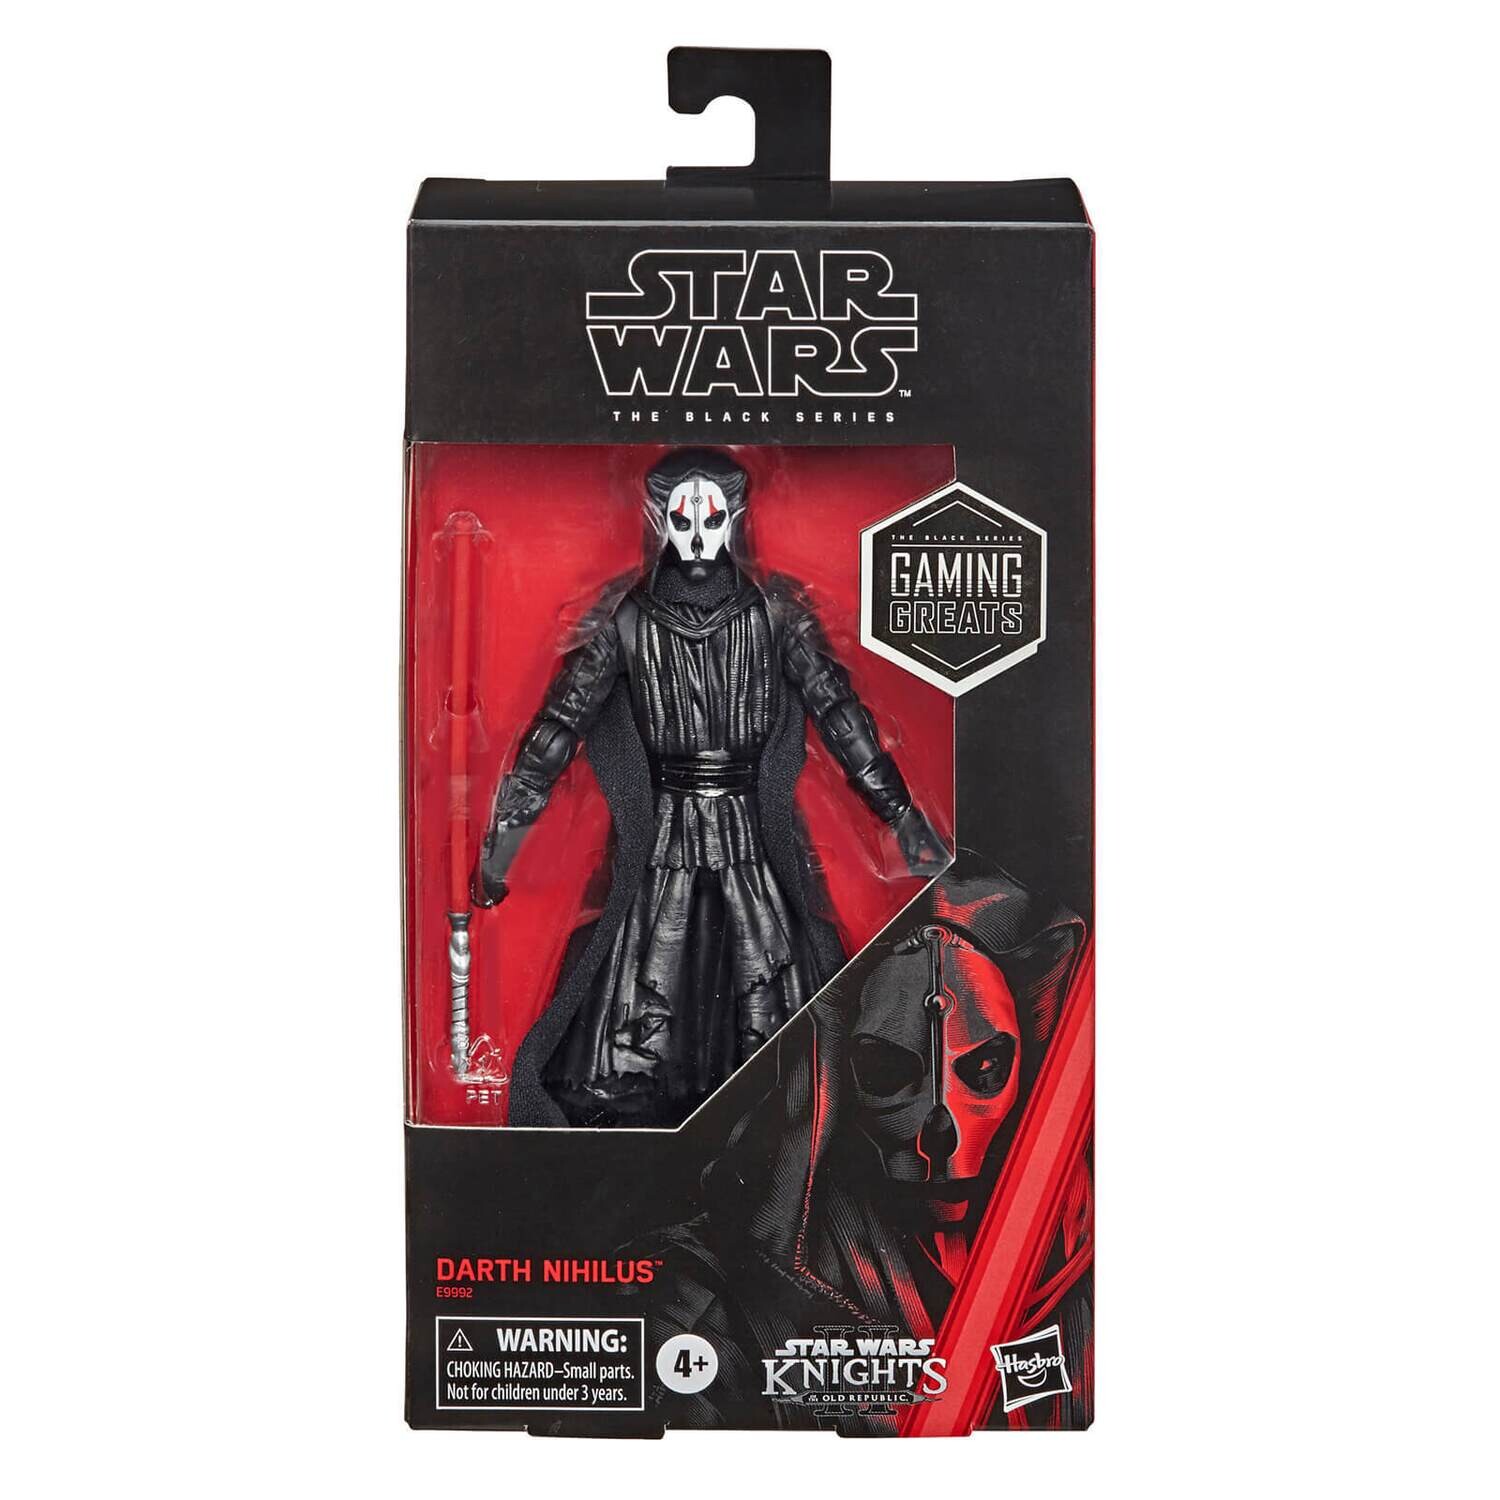 Star Wars Black Series 6 inch Gaming Greats  Knights of the Old Republic Darth Nihilus